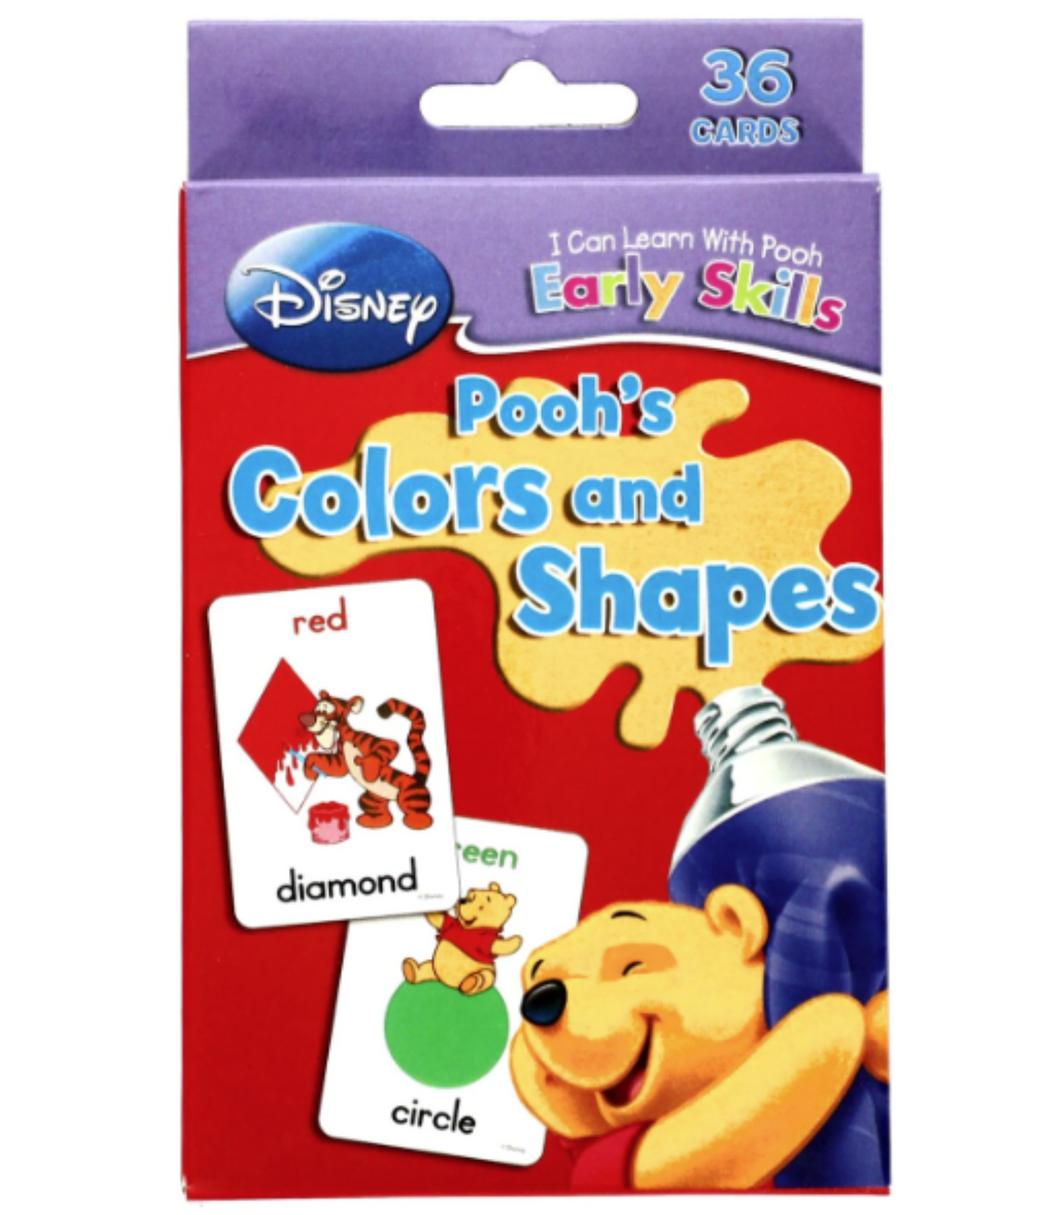 Disney's Winnie the Pooh: Pooh's Colors and Shapes Flashcards